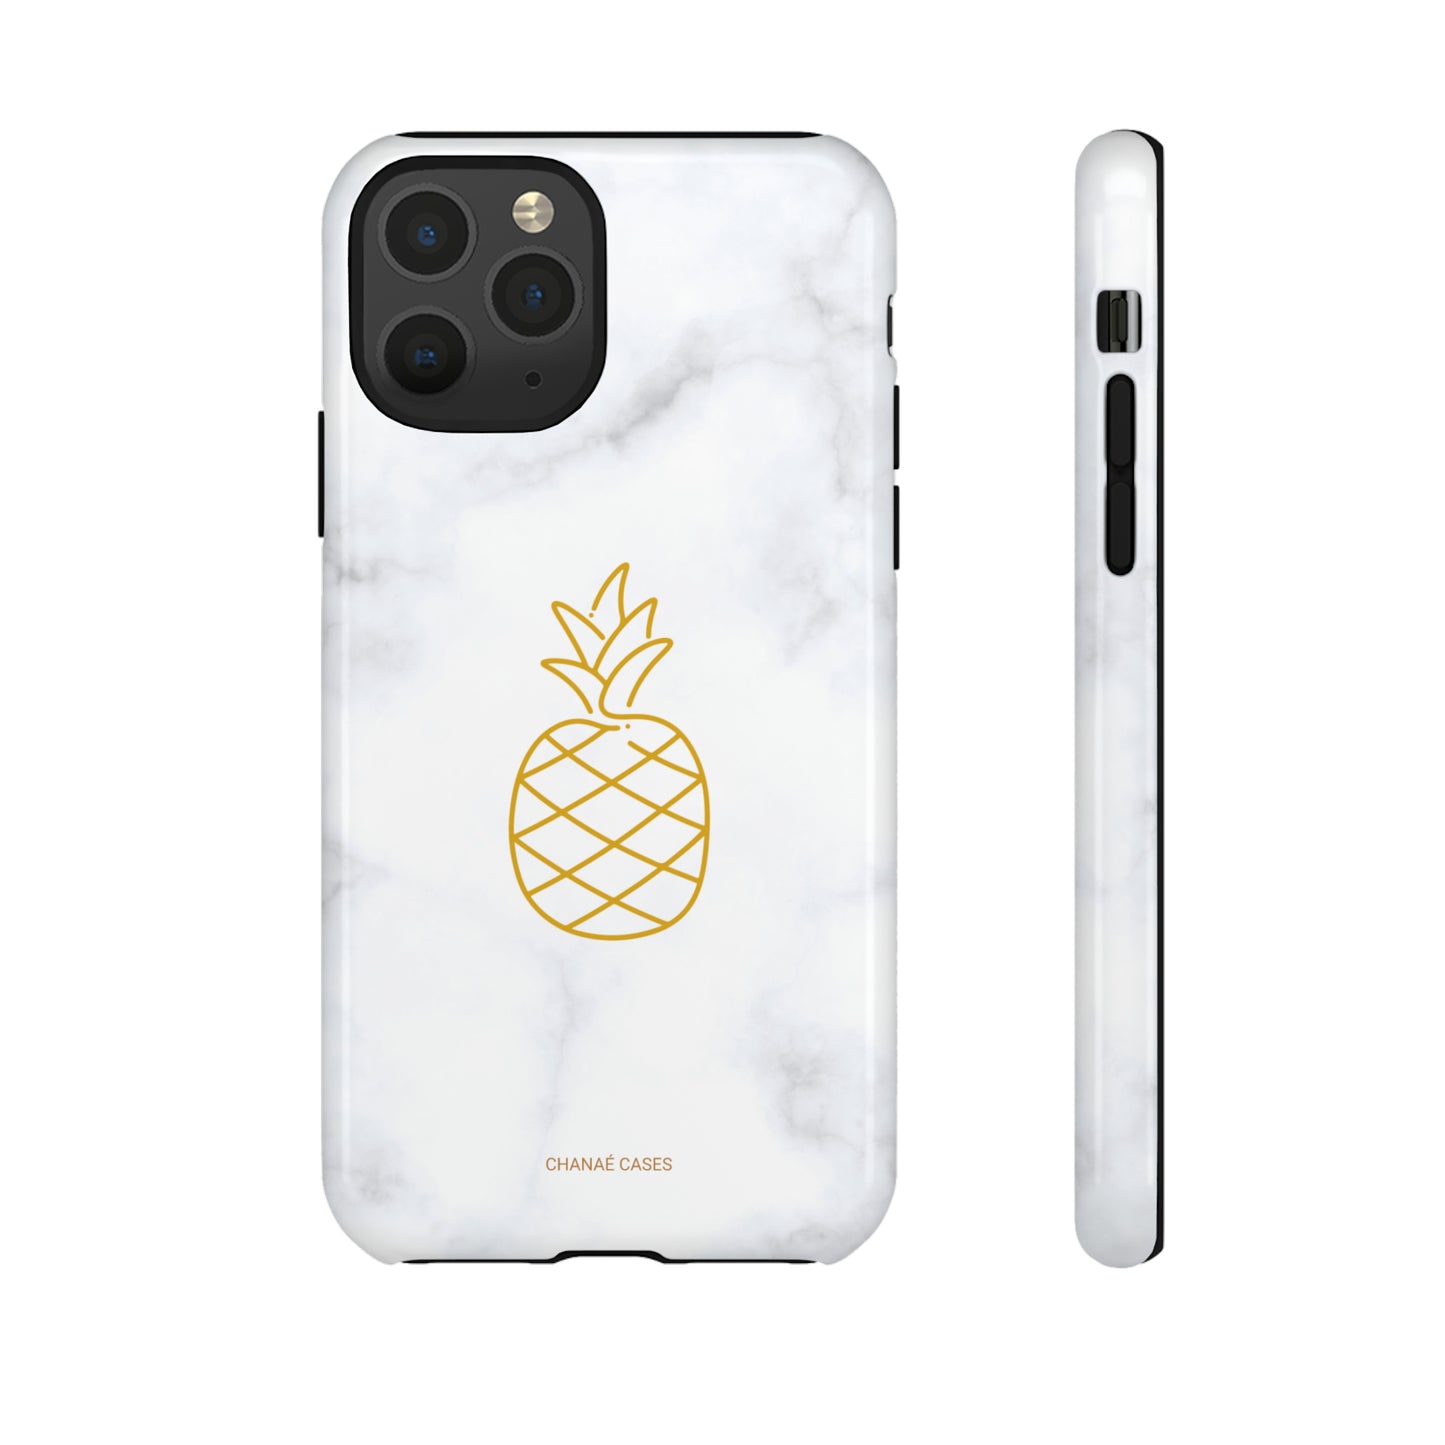 Pineapple Marble iPhone "Tough" Case (White)